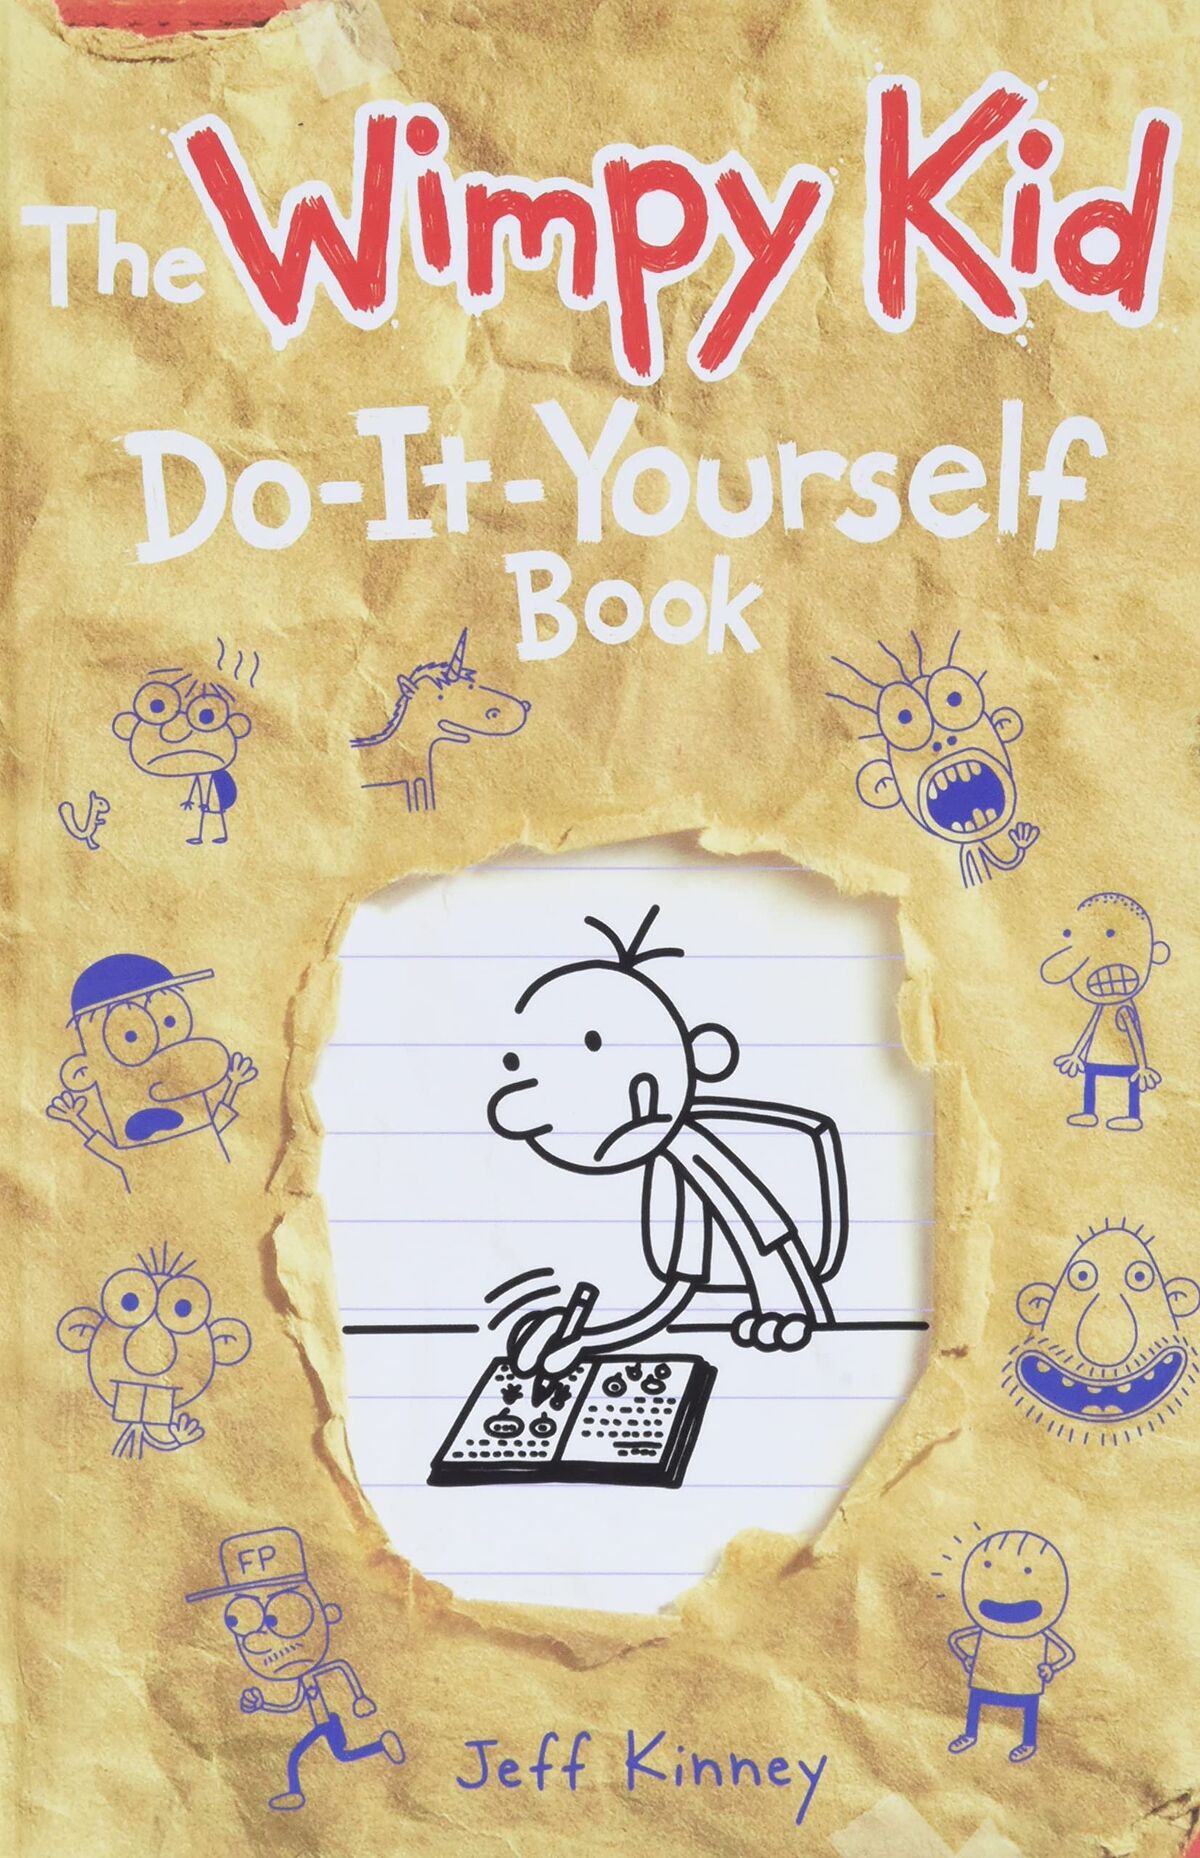 https://static.wikia.nocookie.net/doawk/images/1/14/The_Wimpy_Kid_Do-It-Yourself_Book.jpg/revision/latest/scale-to-width-down/1200?cb=20220628221115